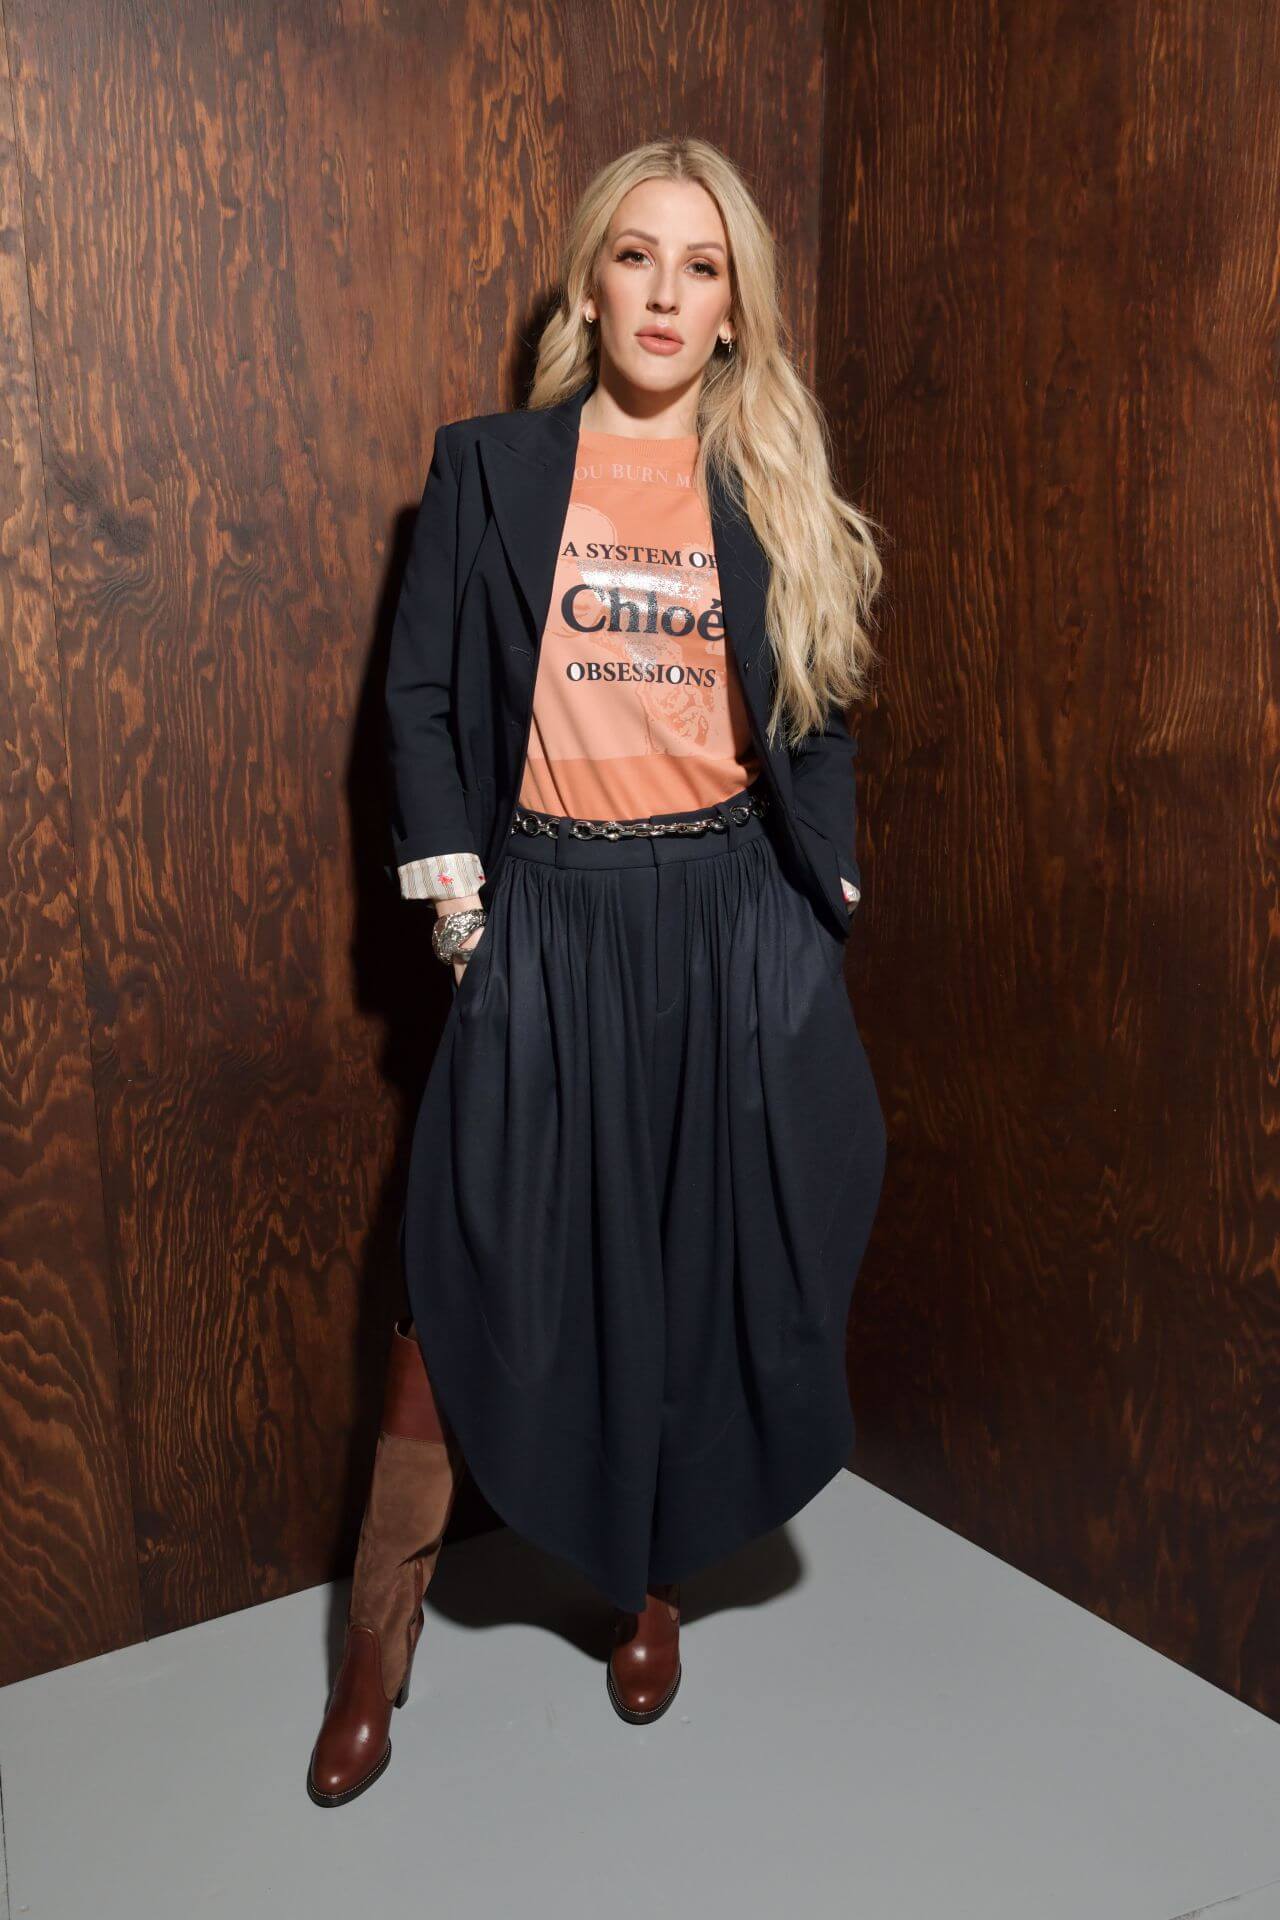 Ellie Goulding In Orange Top And Blazer With Pleated Skirt Outfit